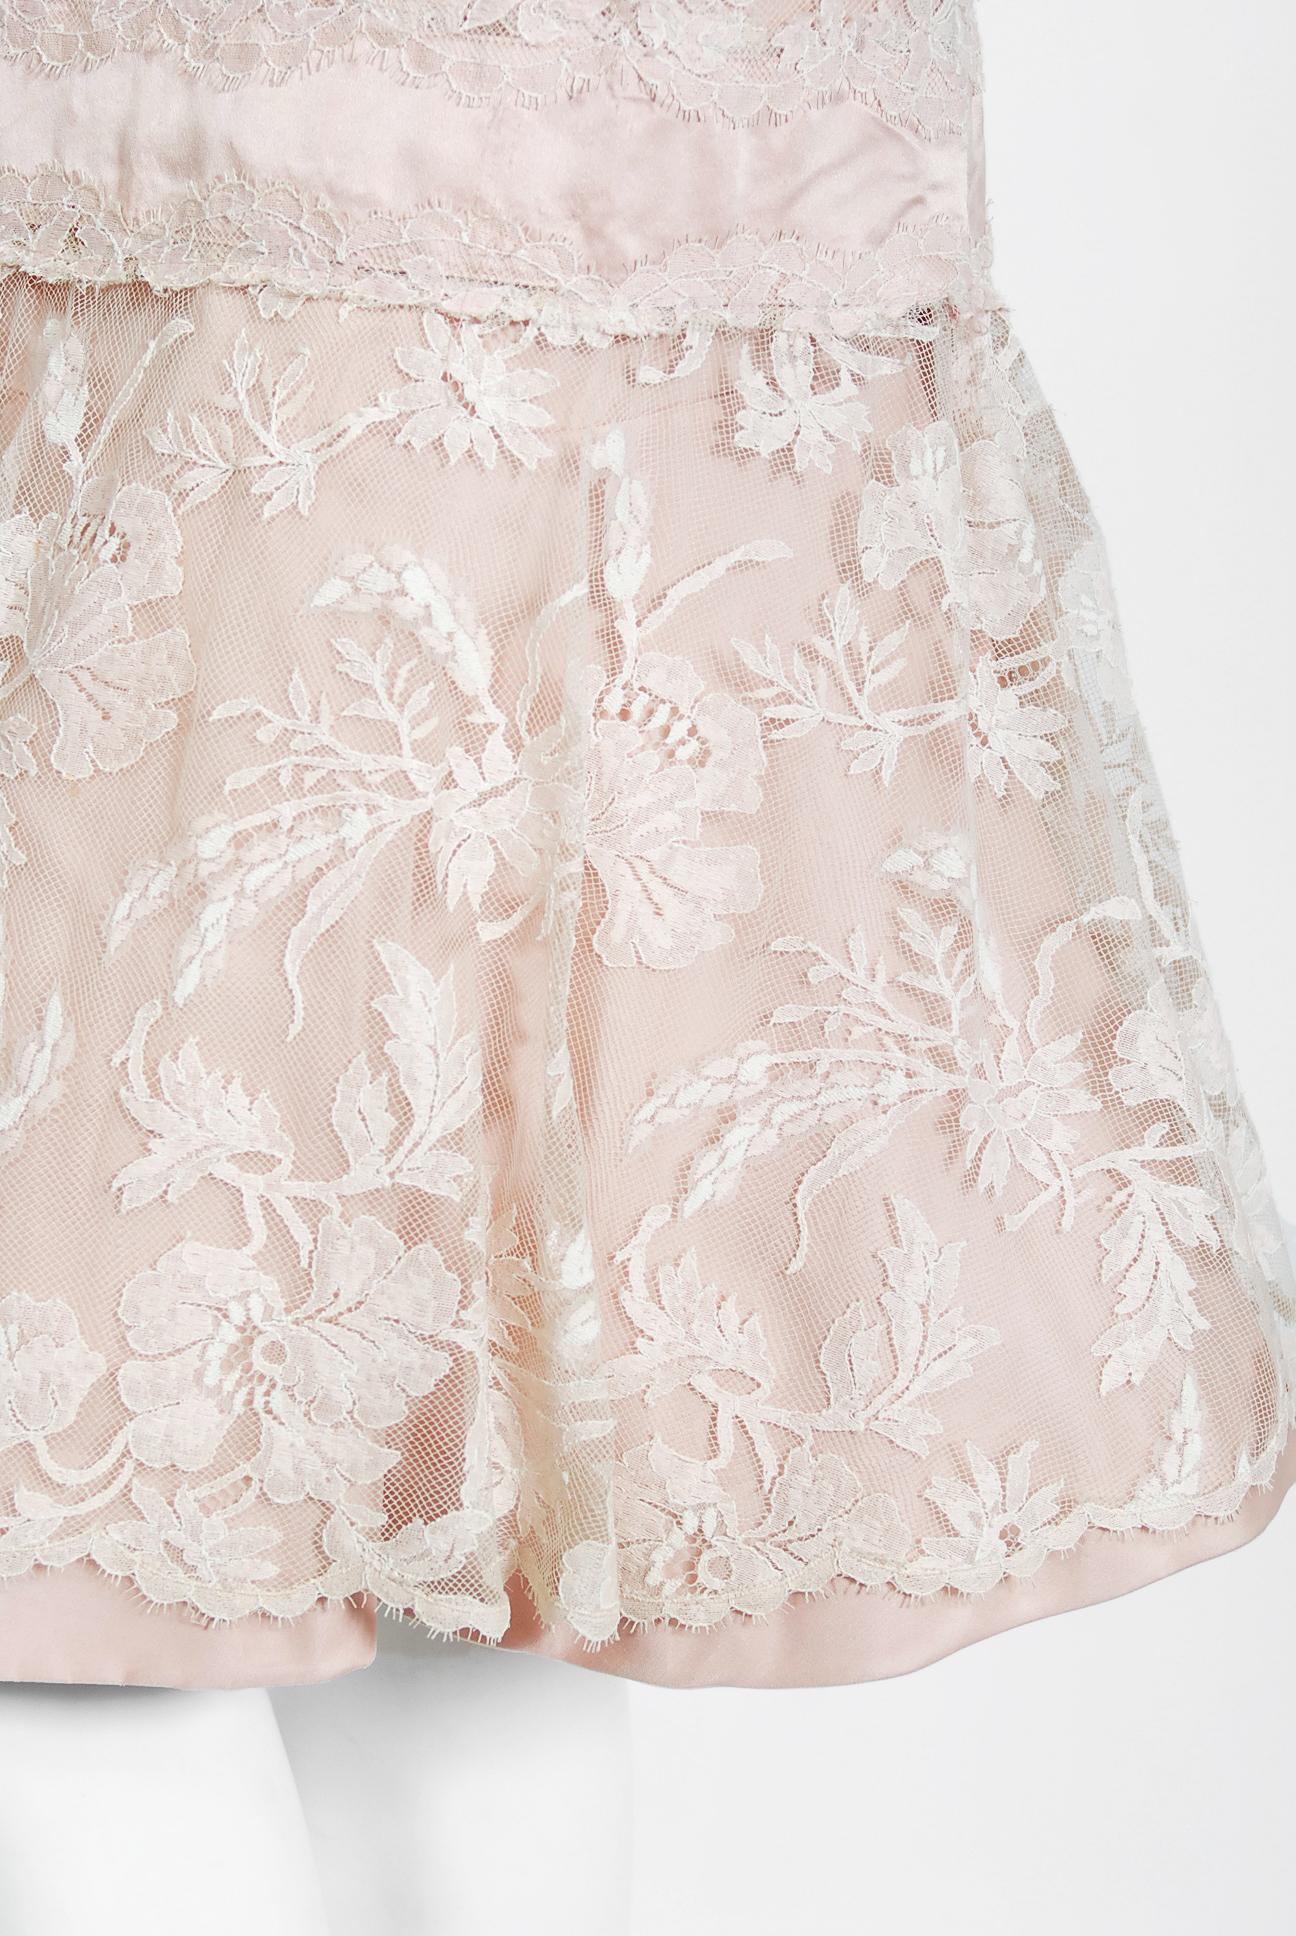 Vintage 1950s Harvey Berin Pale-Pink Lace Illusion & Silk Flounce Cocktail Dress In Good Condition For Sale In Beverly Hills, CA